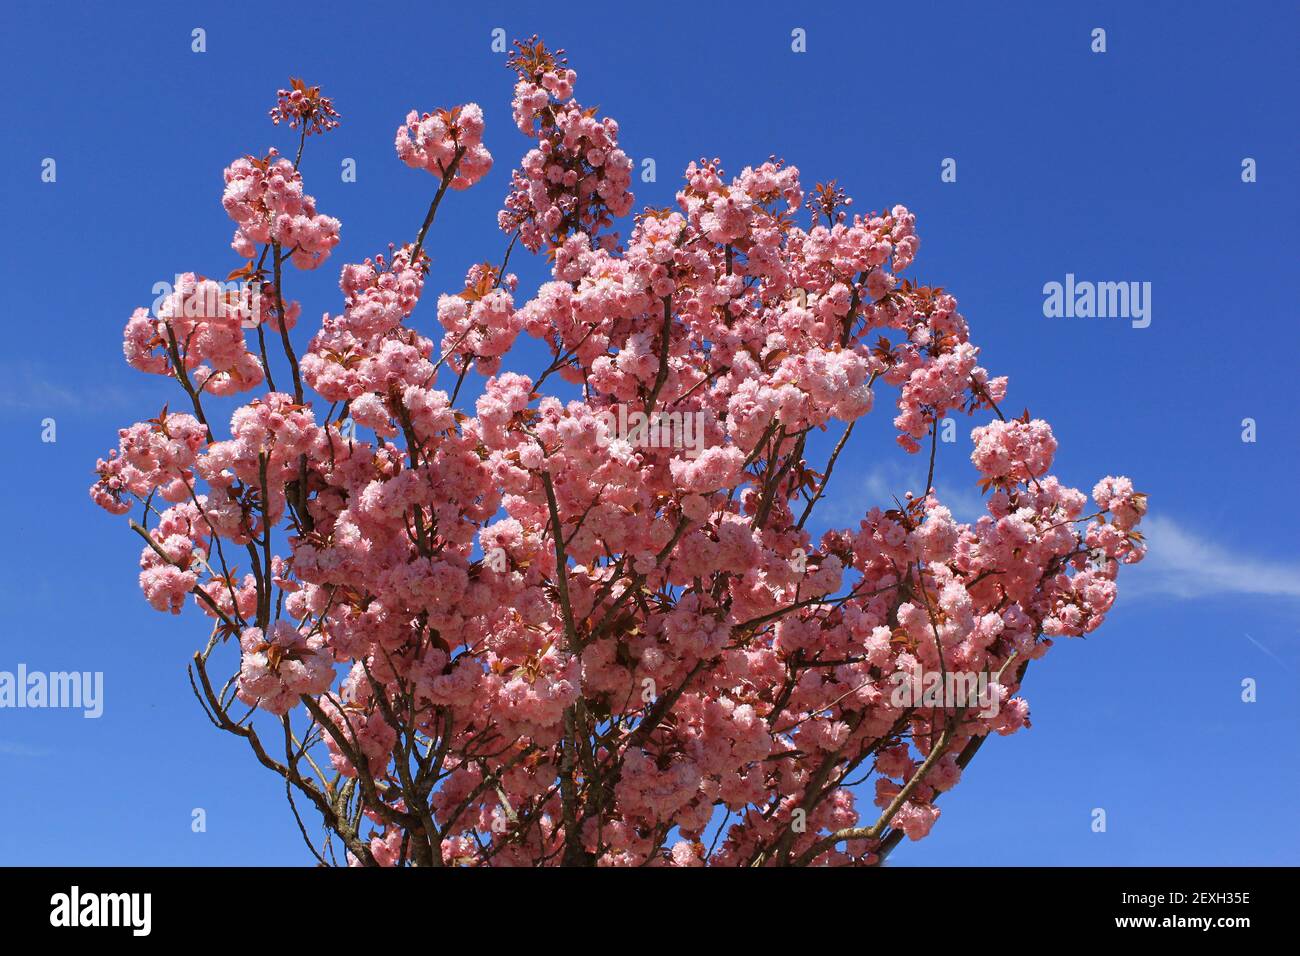 Tree with pink flowers Stock Photo